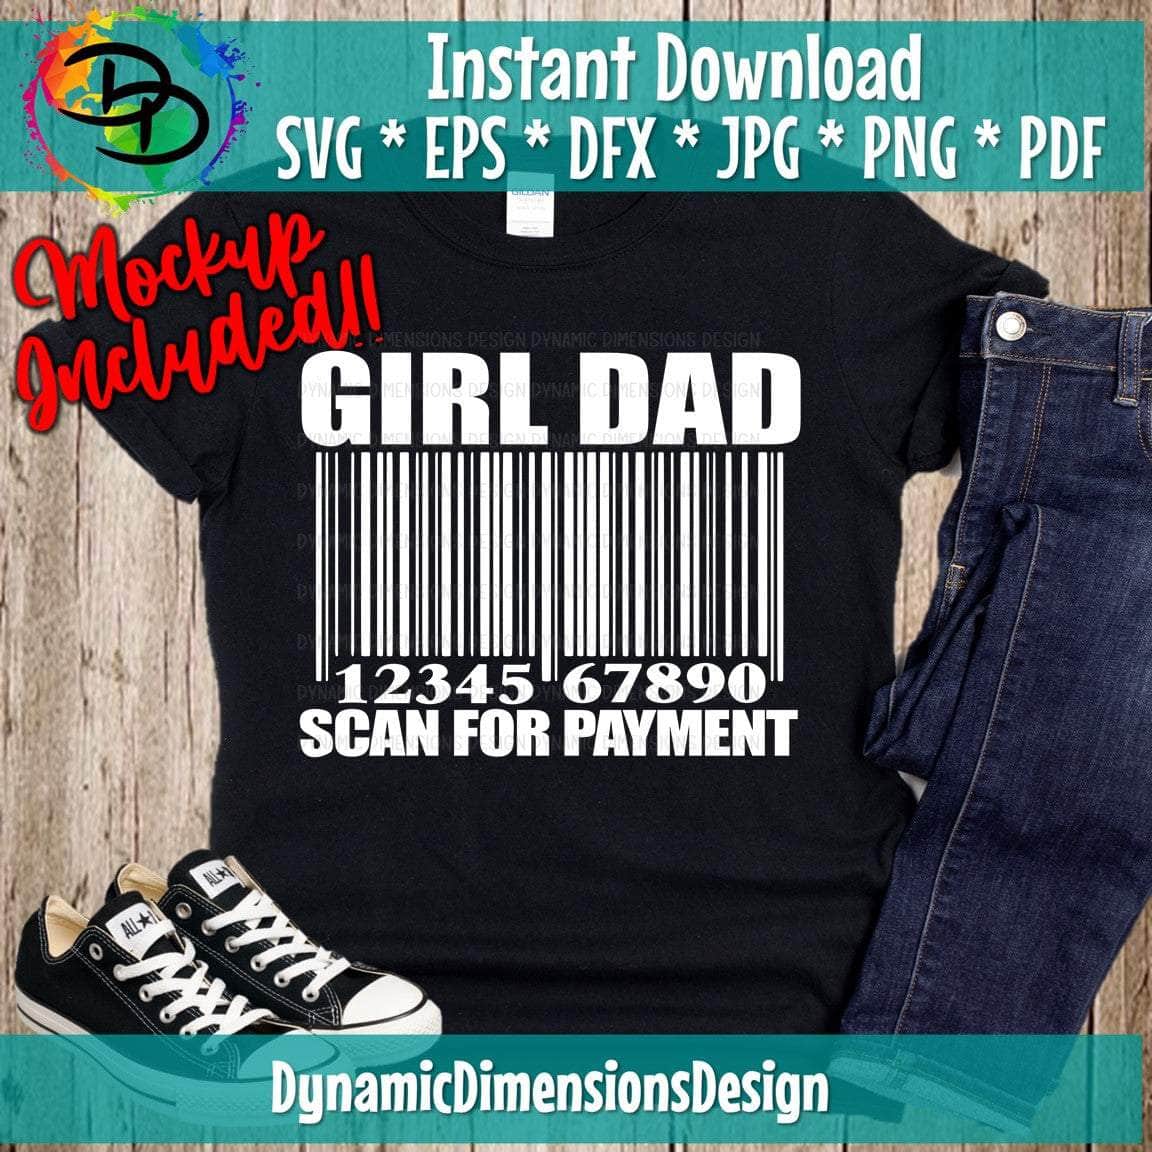 Girl Dad Scan for Payment